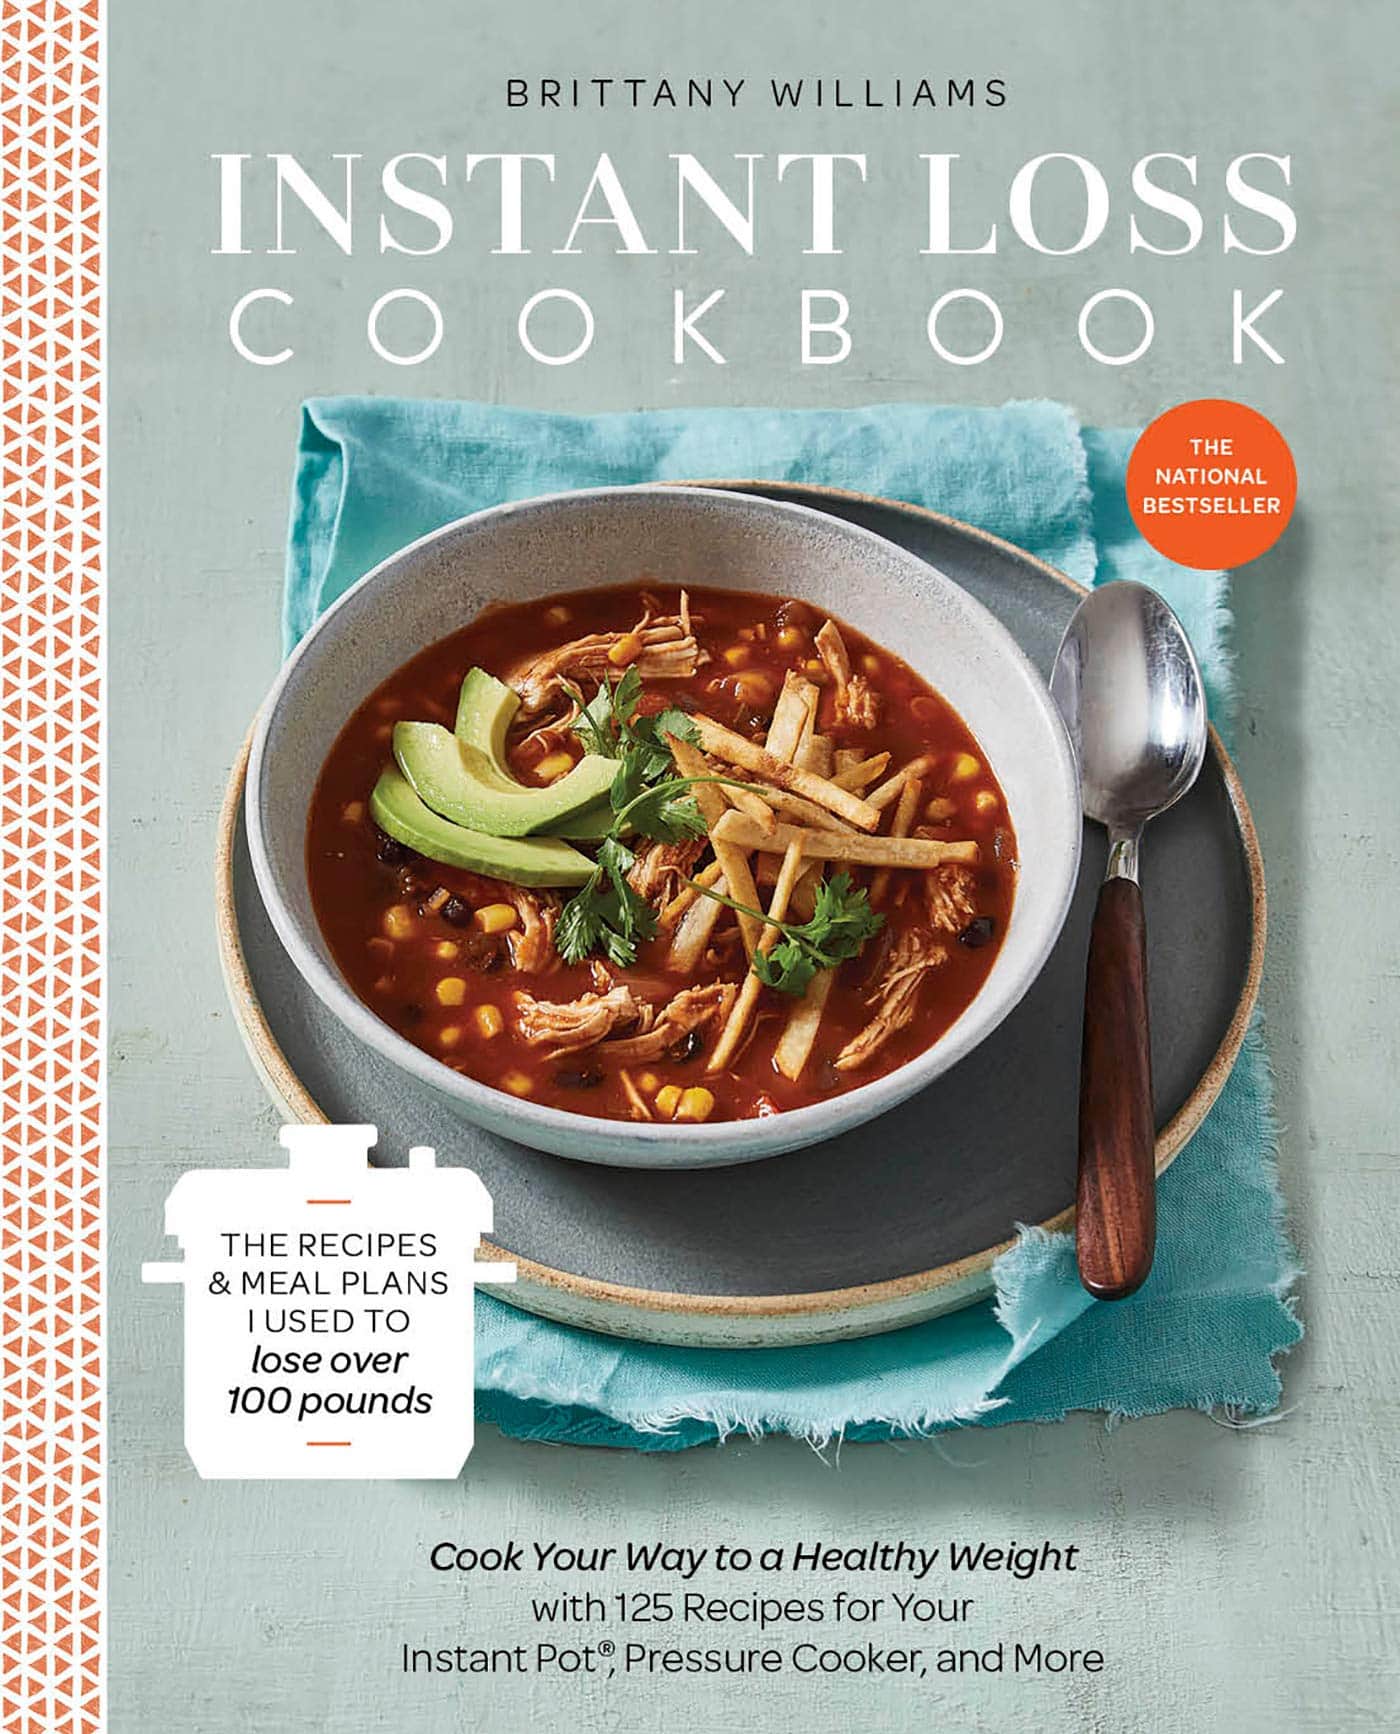 Cookbook For Quick Healthy Weight Loss